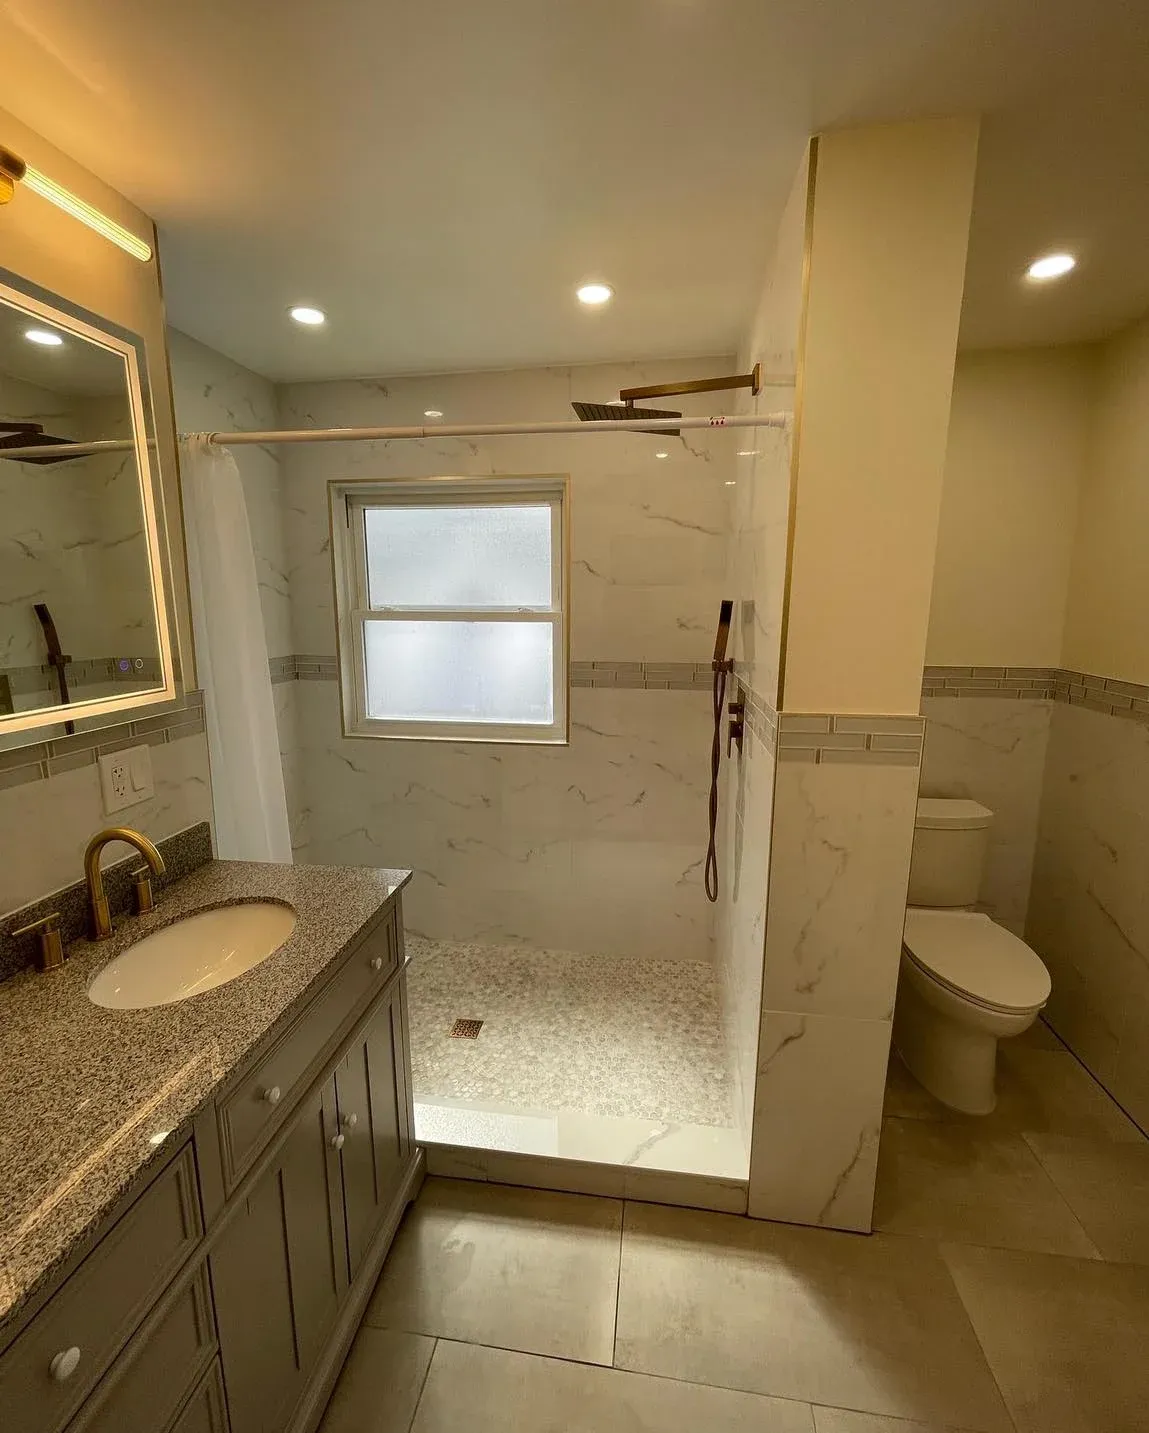 Full Home Remodeling for Limitless Building Inc. in Queens, NY